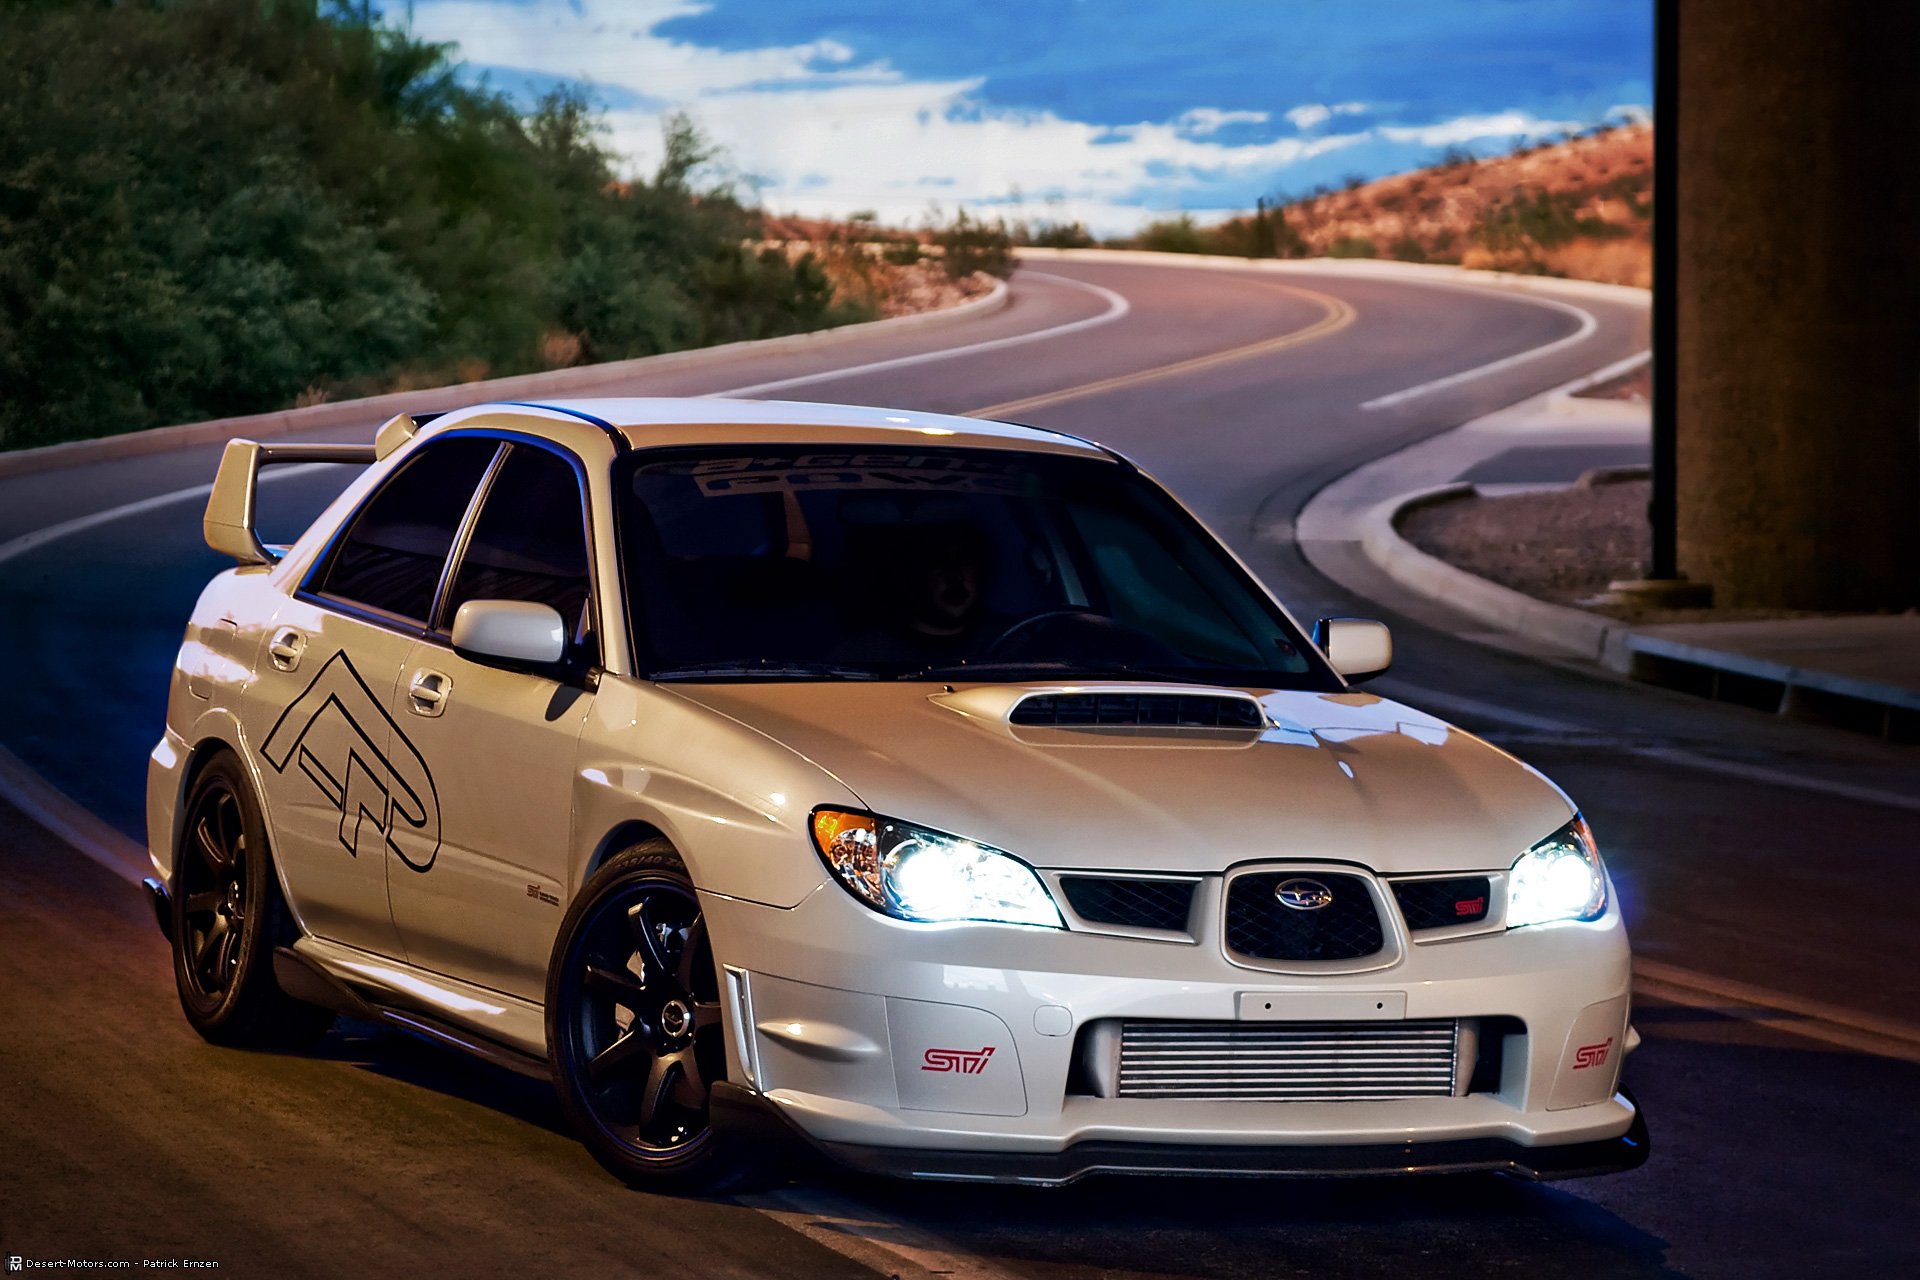 07 Agency Power Subaru Wrx Sti Tuning Wallpapers Hd Desktop And Mobile Backgrounds